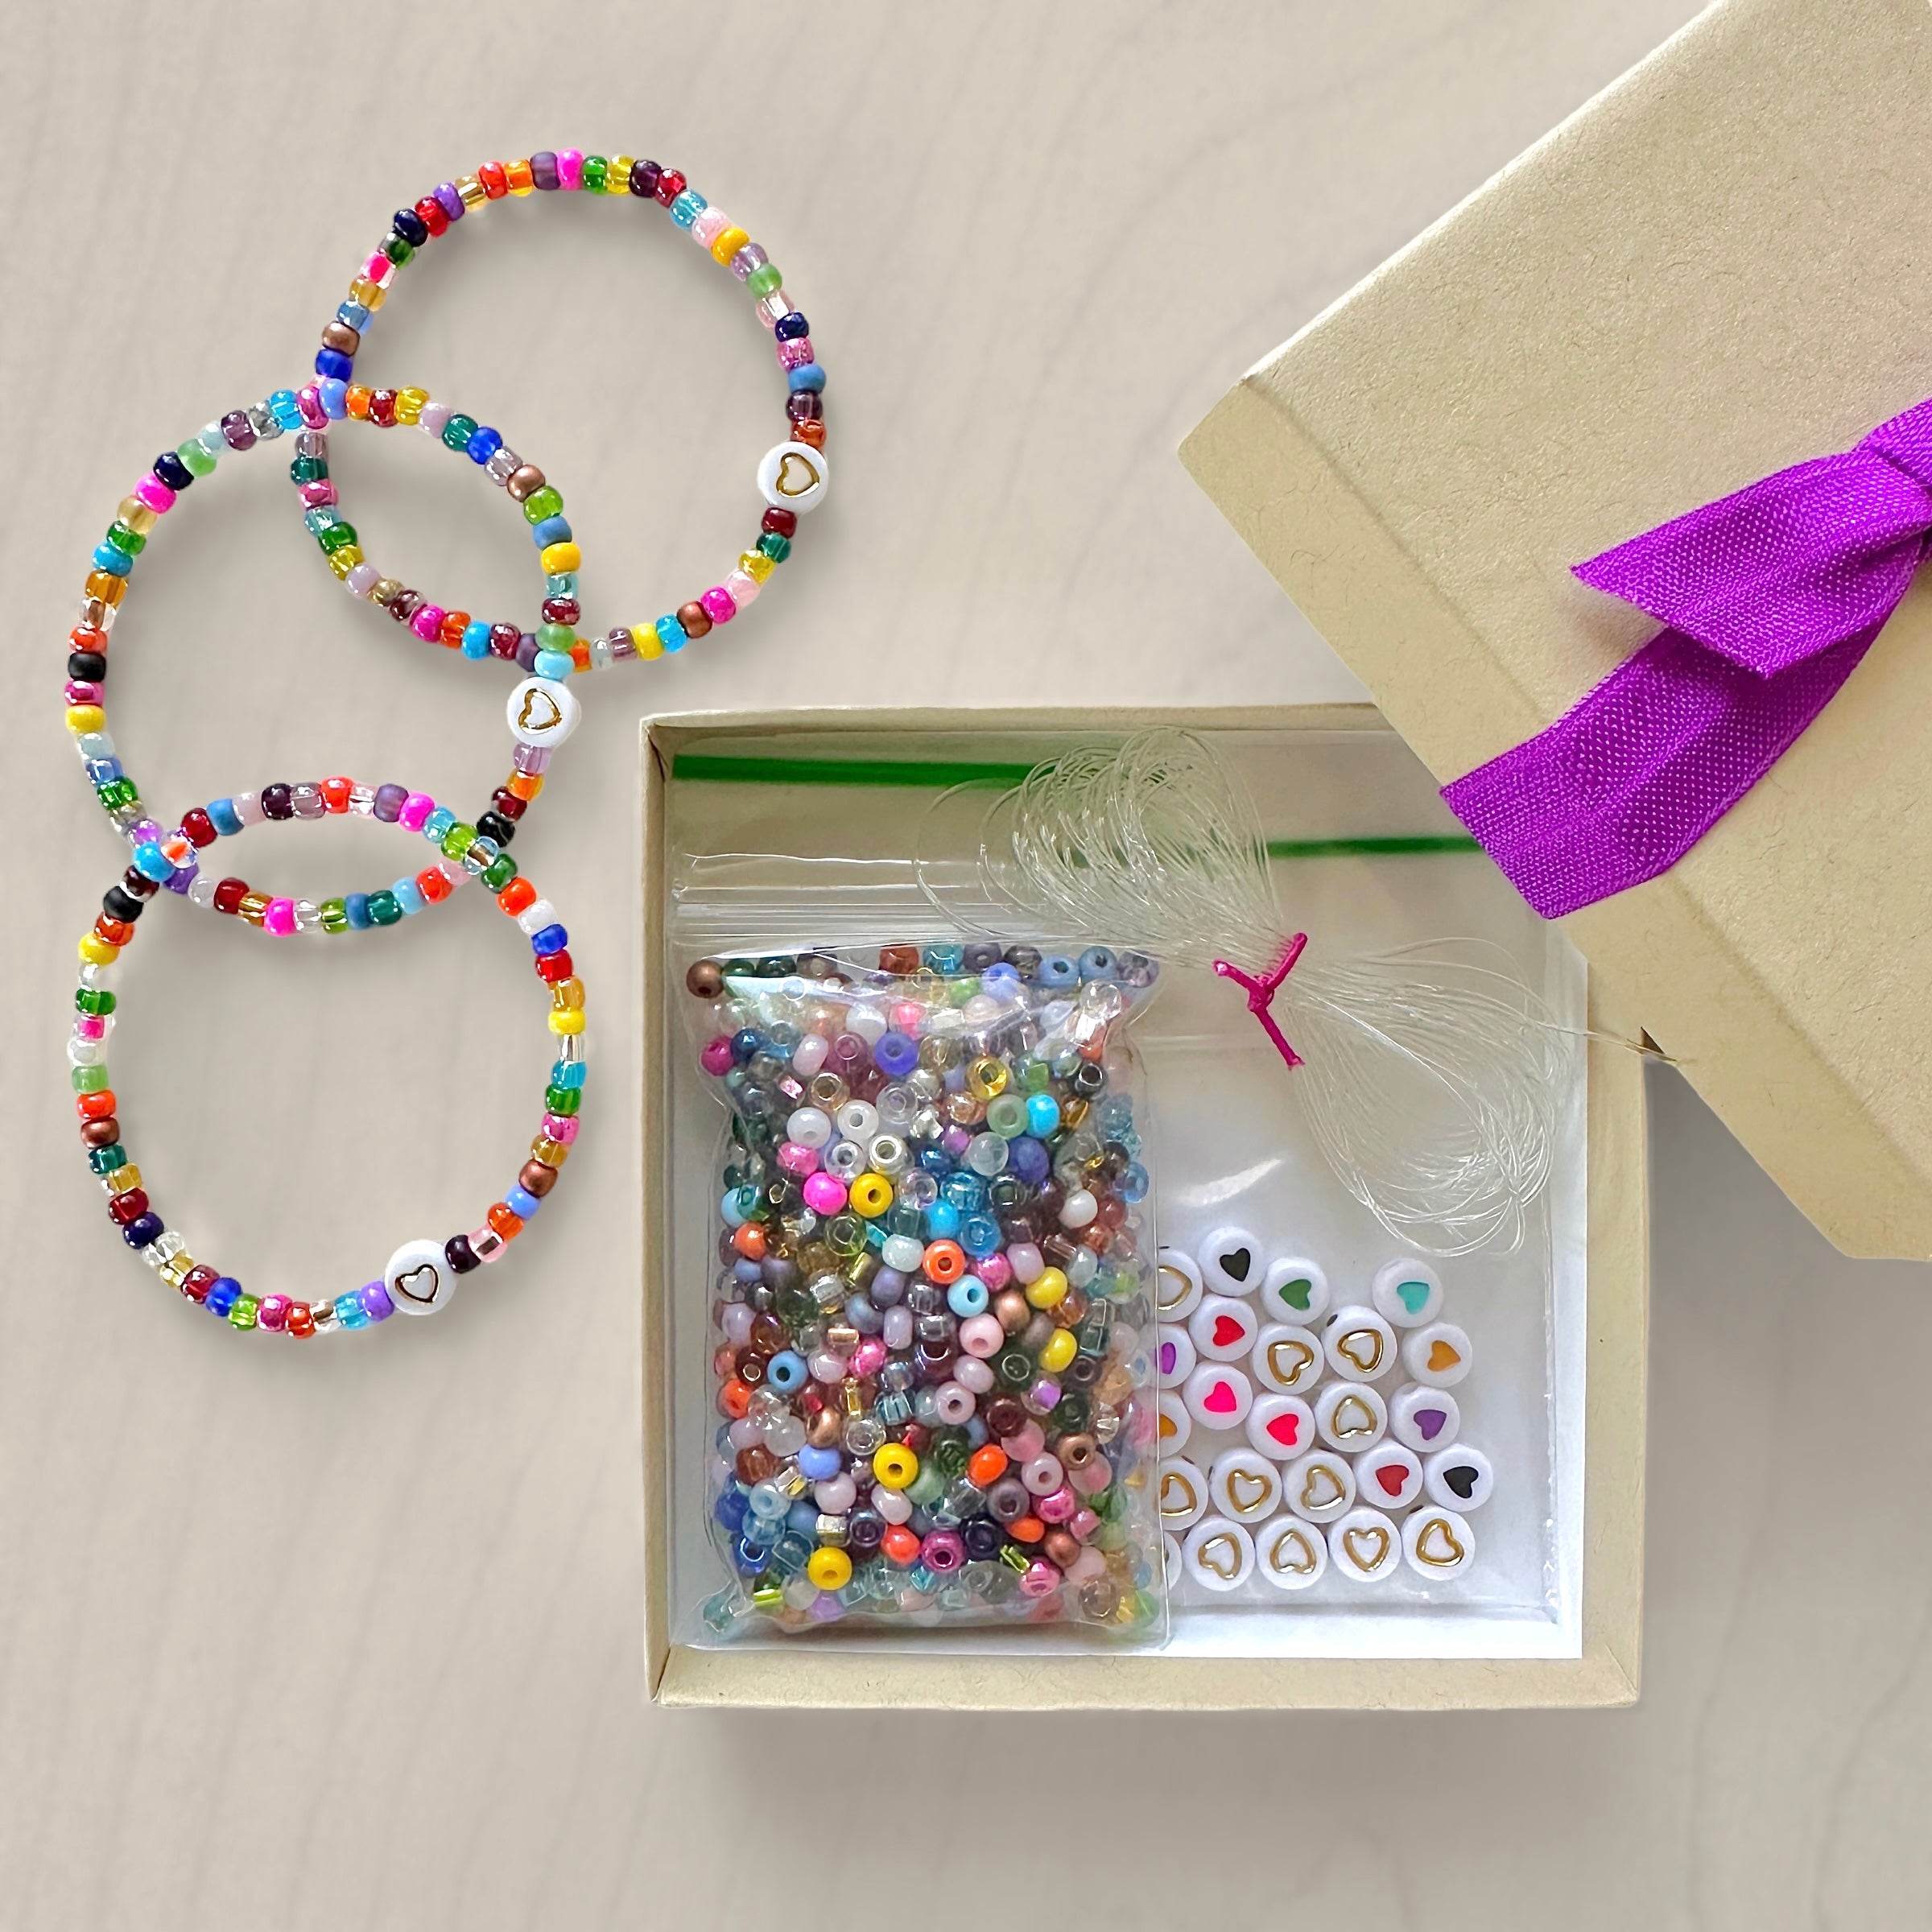 Beading Kits for Jewelry Making & Crafts